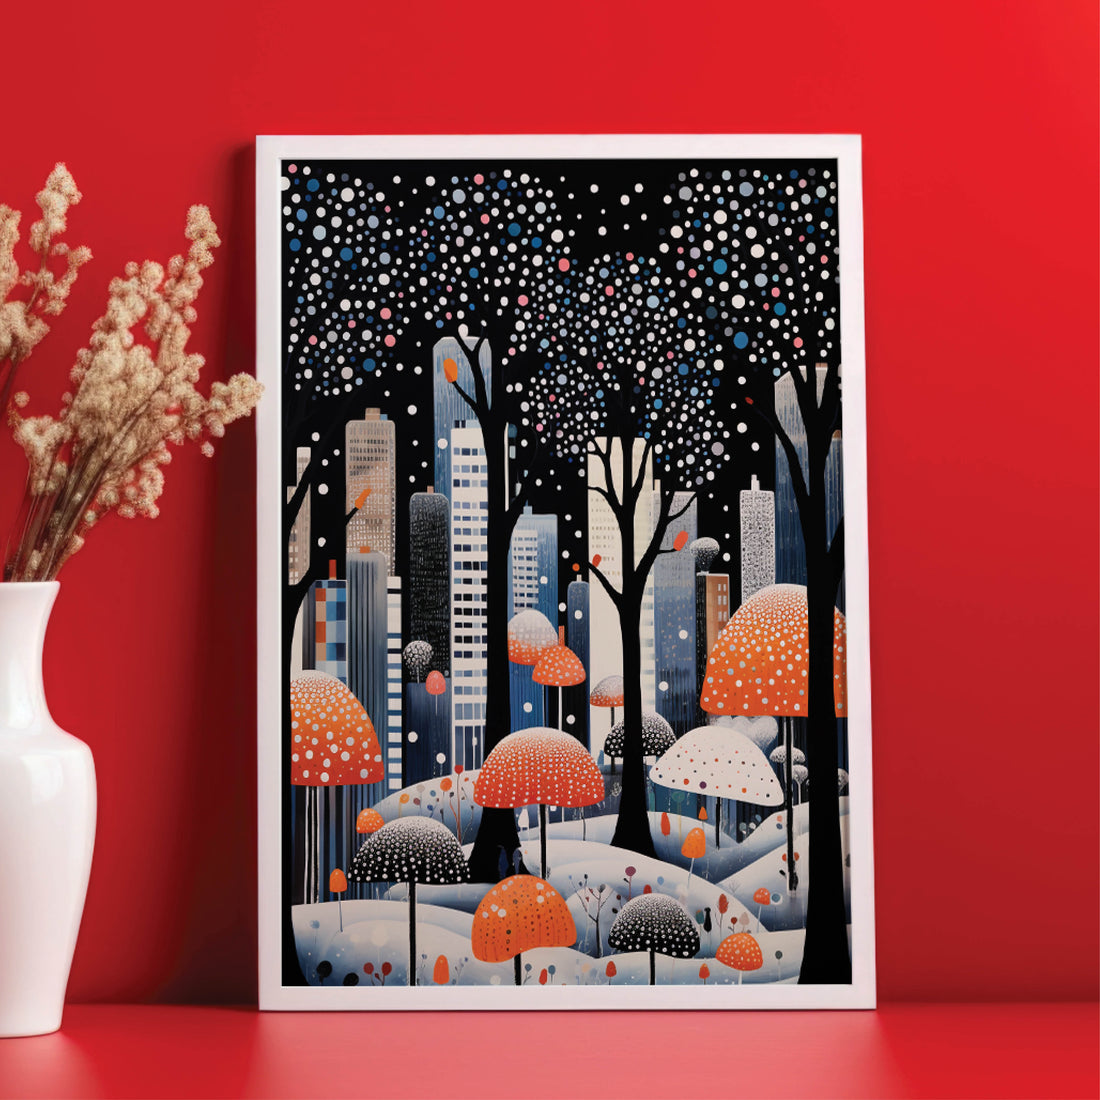 Poster Cityscape Polkadot - Add sophistication to your home